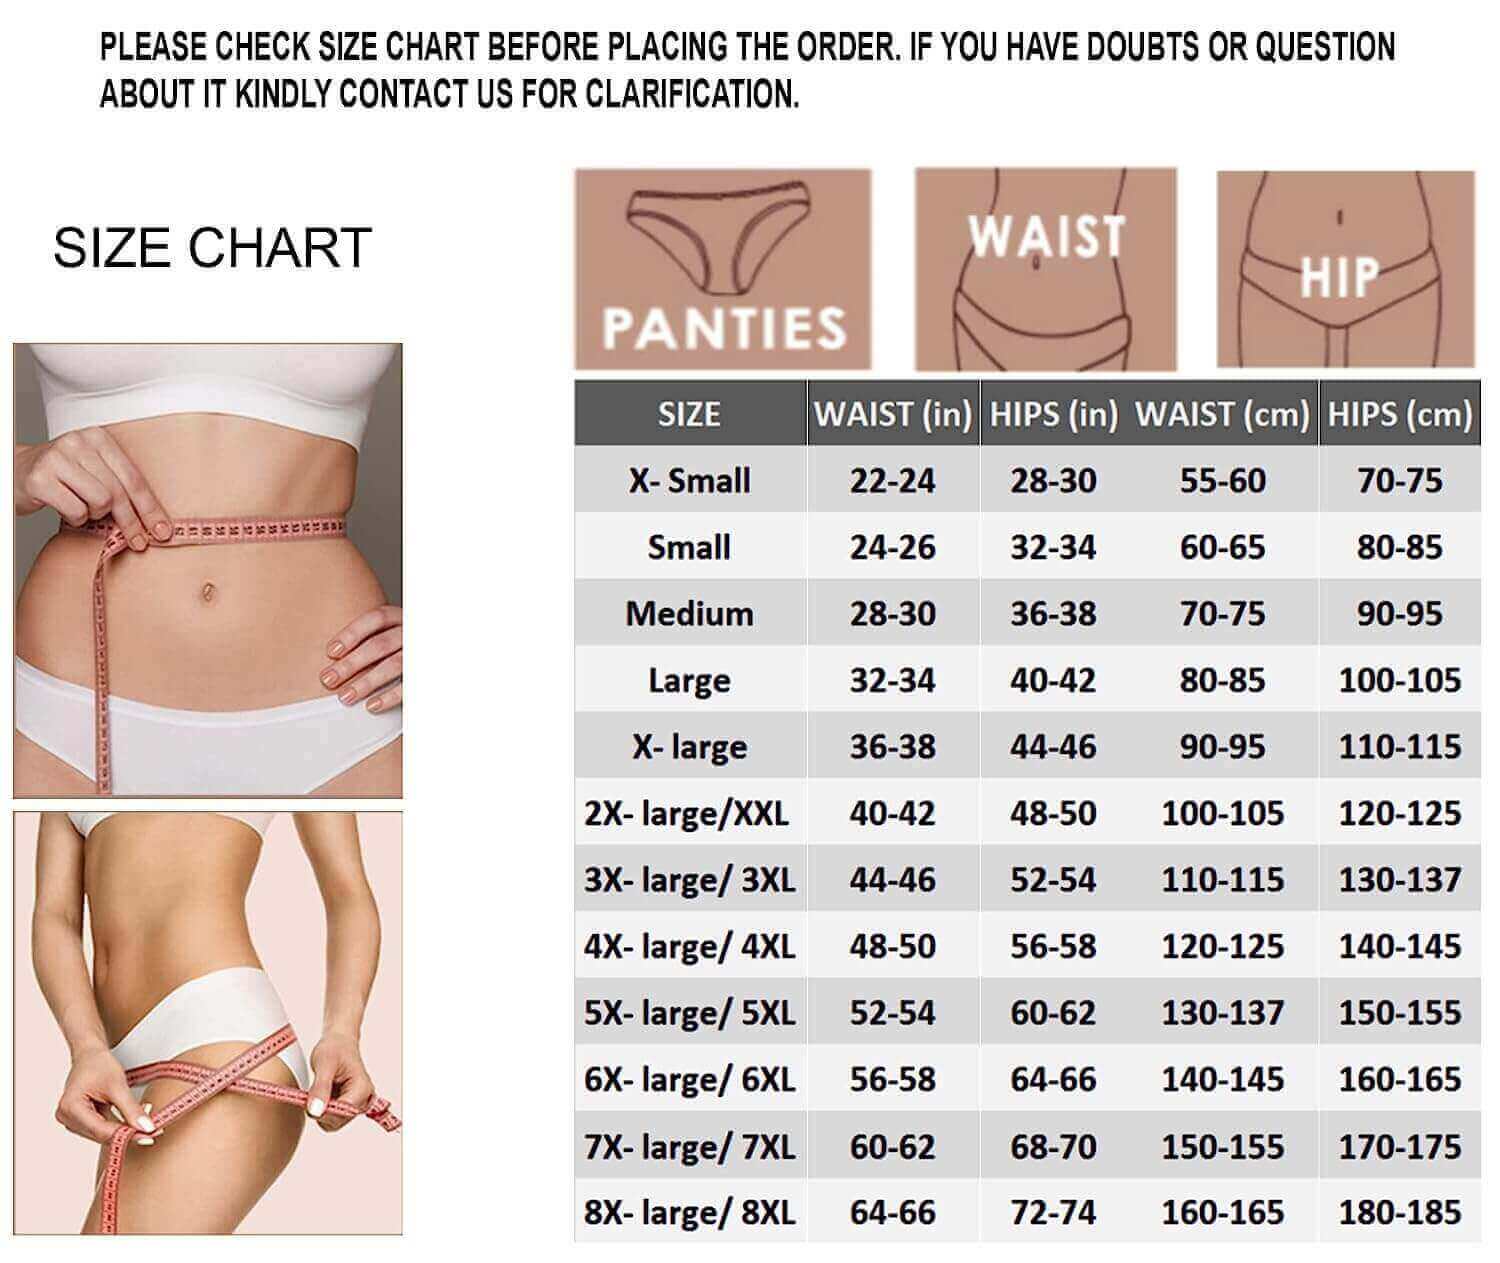 How to know what size of women's underwear will fit me without trying them  on - Quora